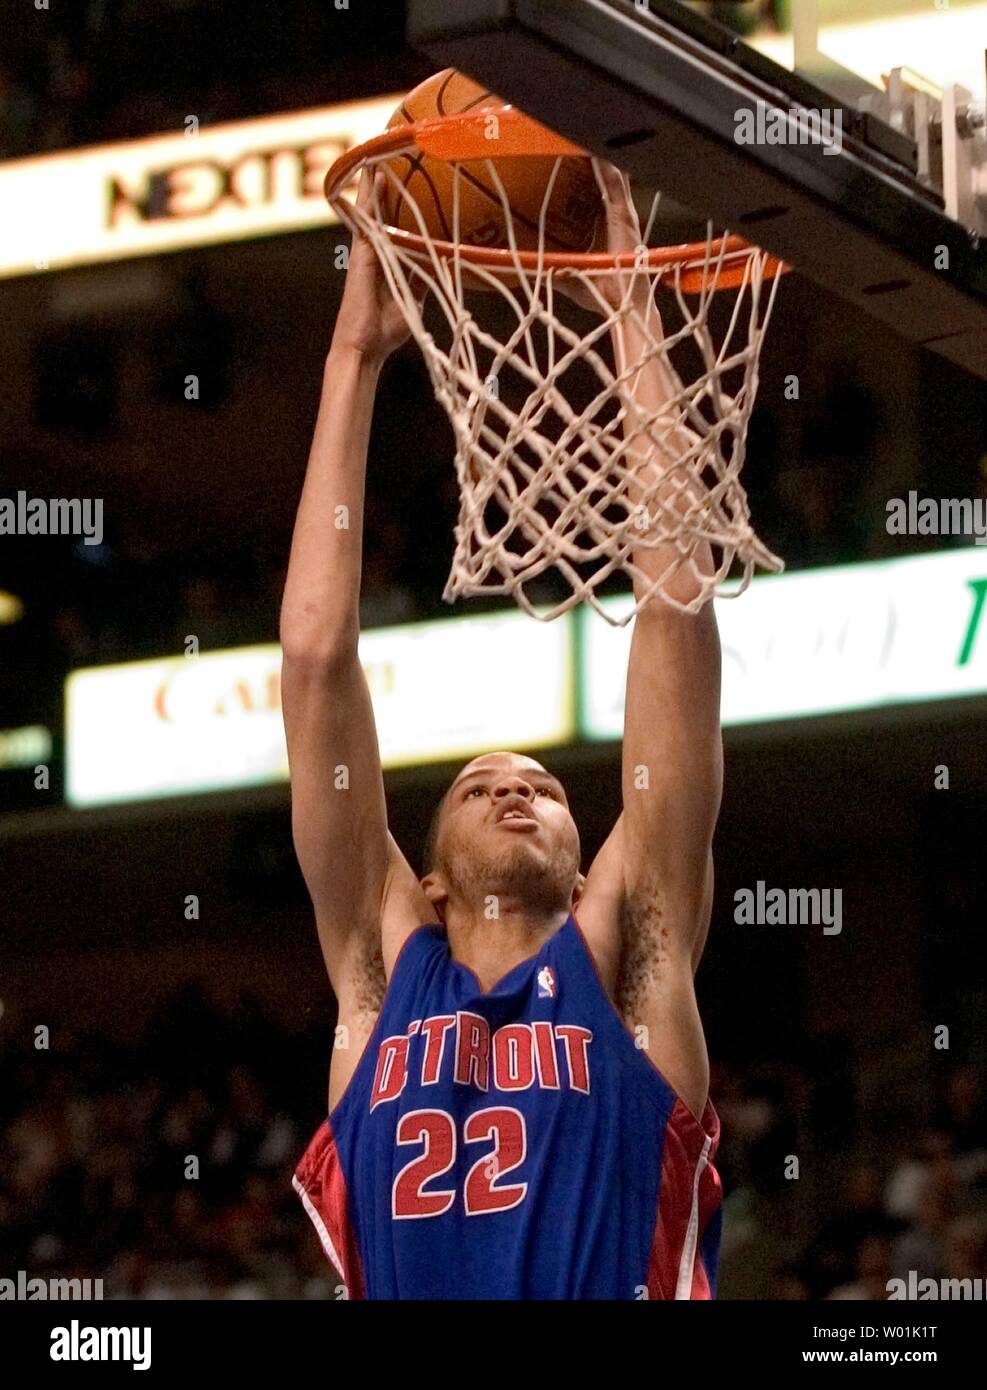 On this day in 2004, Tayshaun Prince hustled back for the CLUTCH